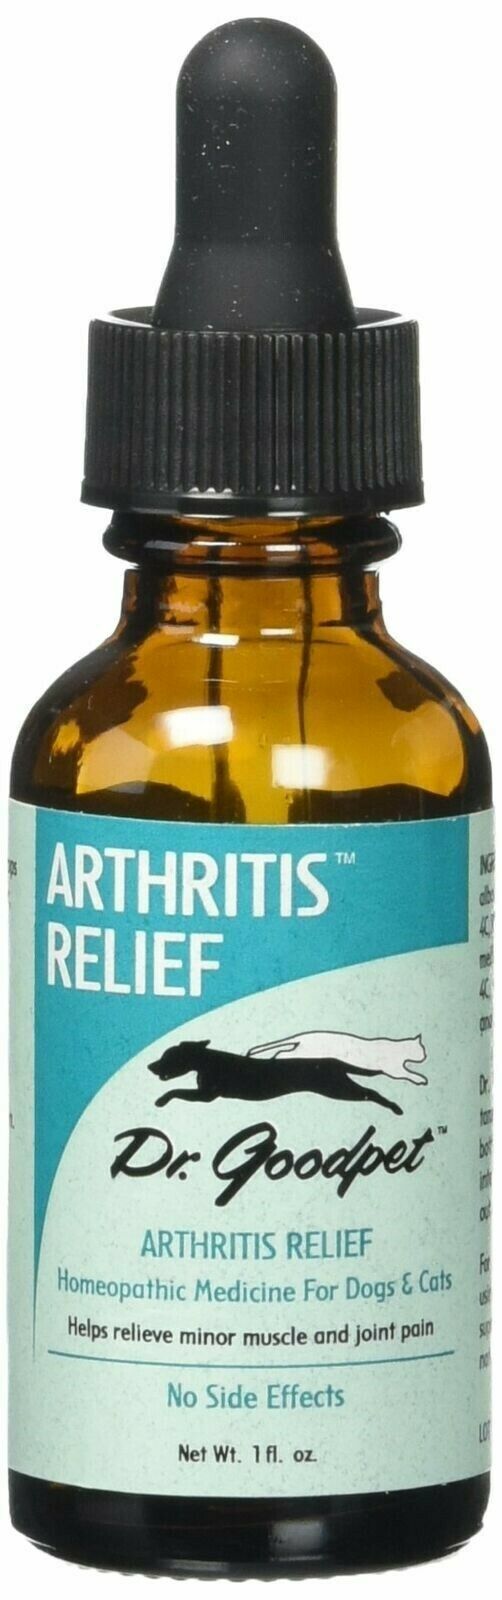 Dr. Goodpet Homeopathic Arthritis Formula for Dogs & Cats, Small - $19.59